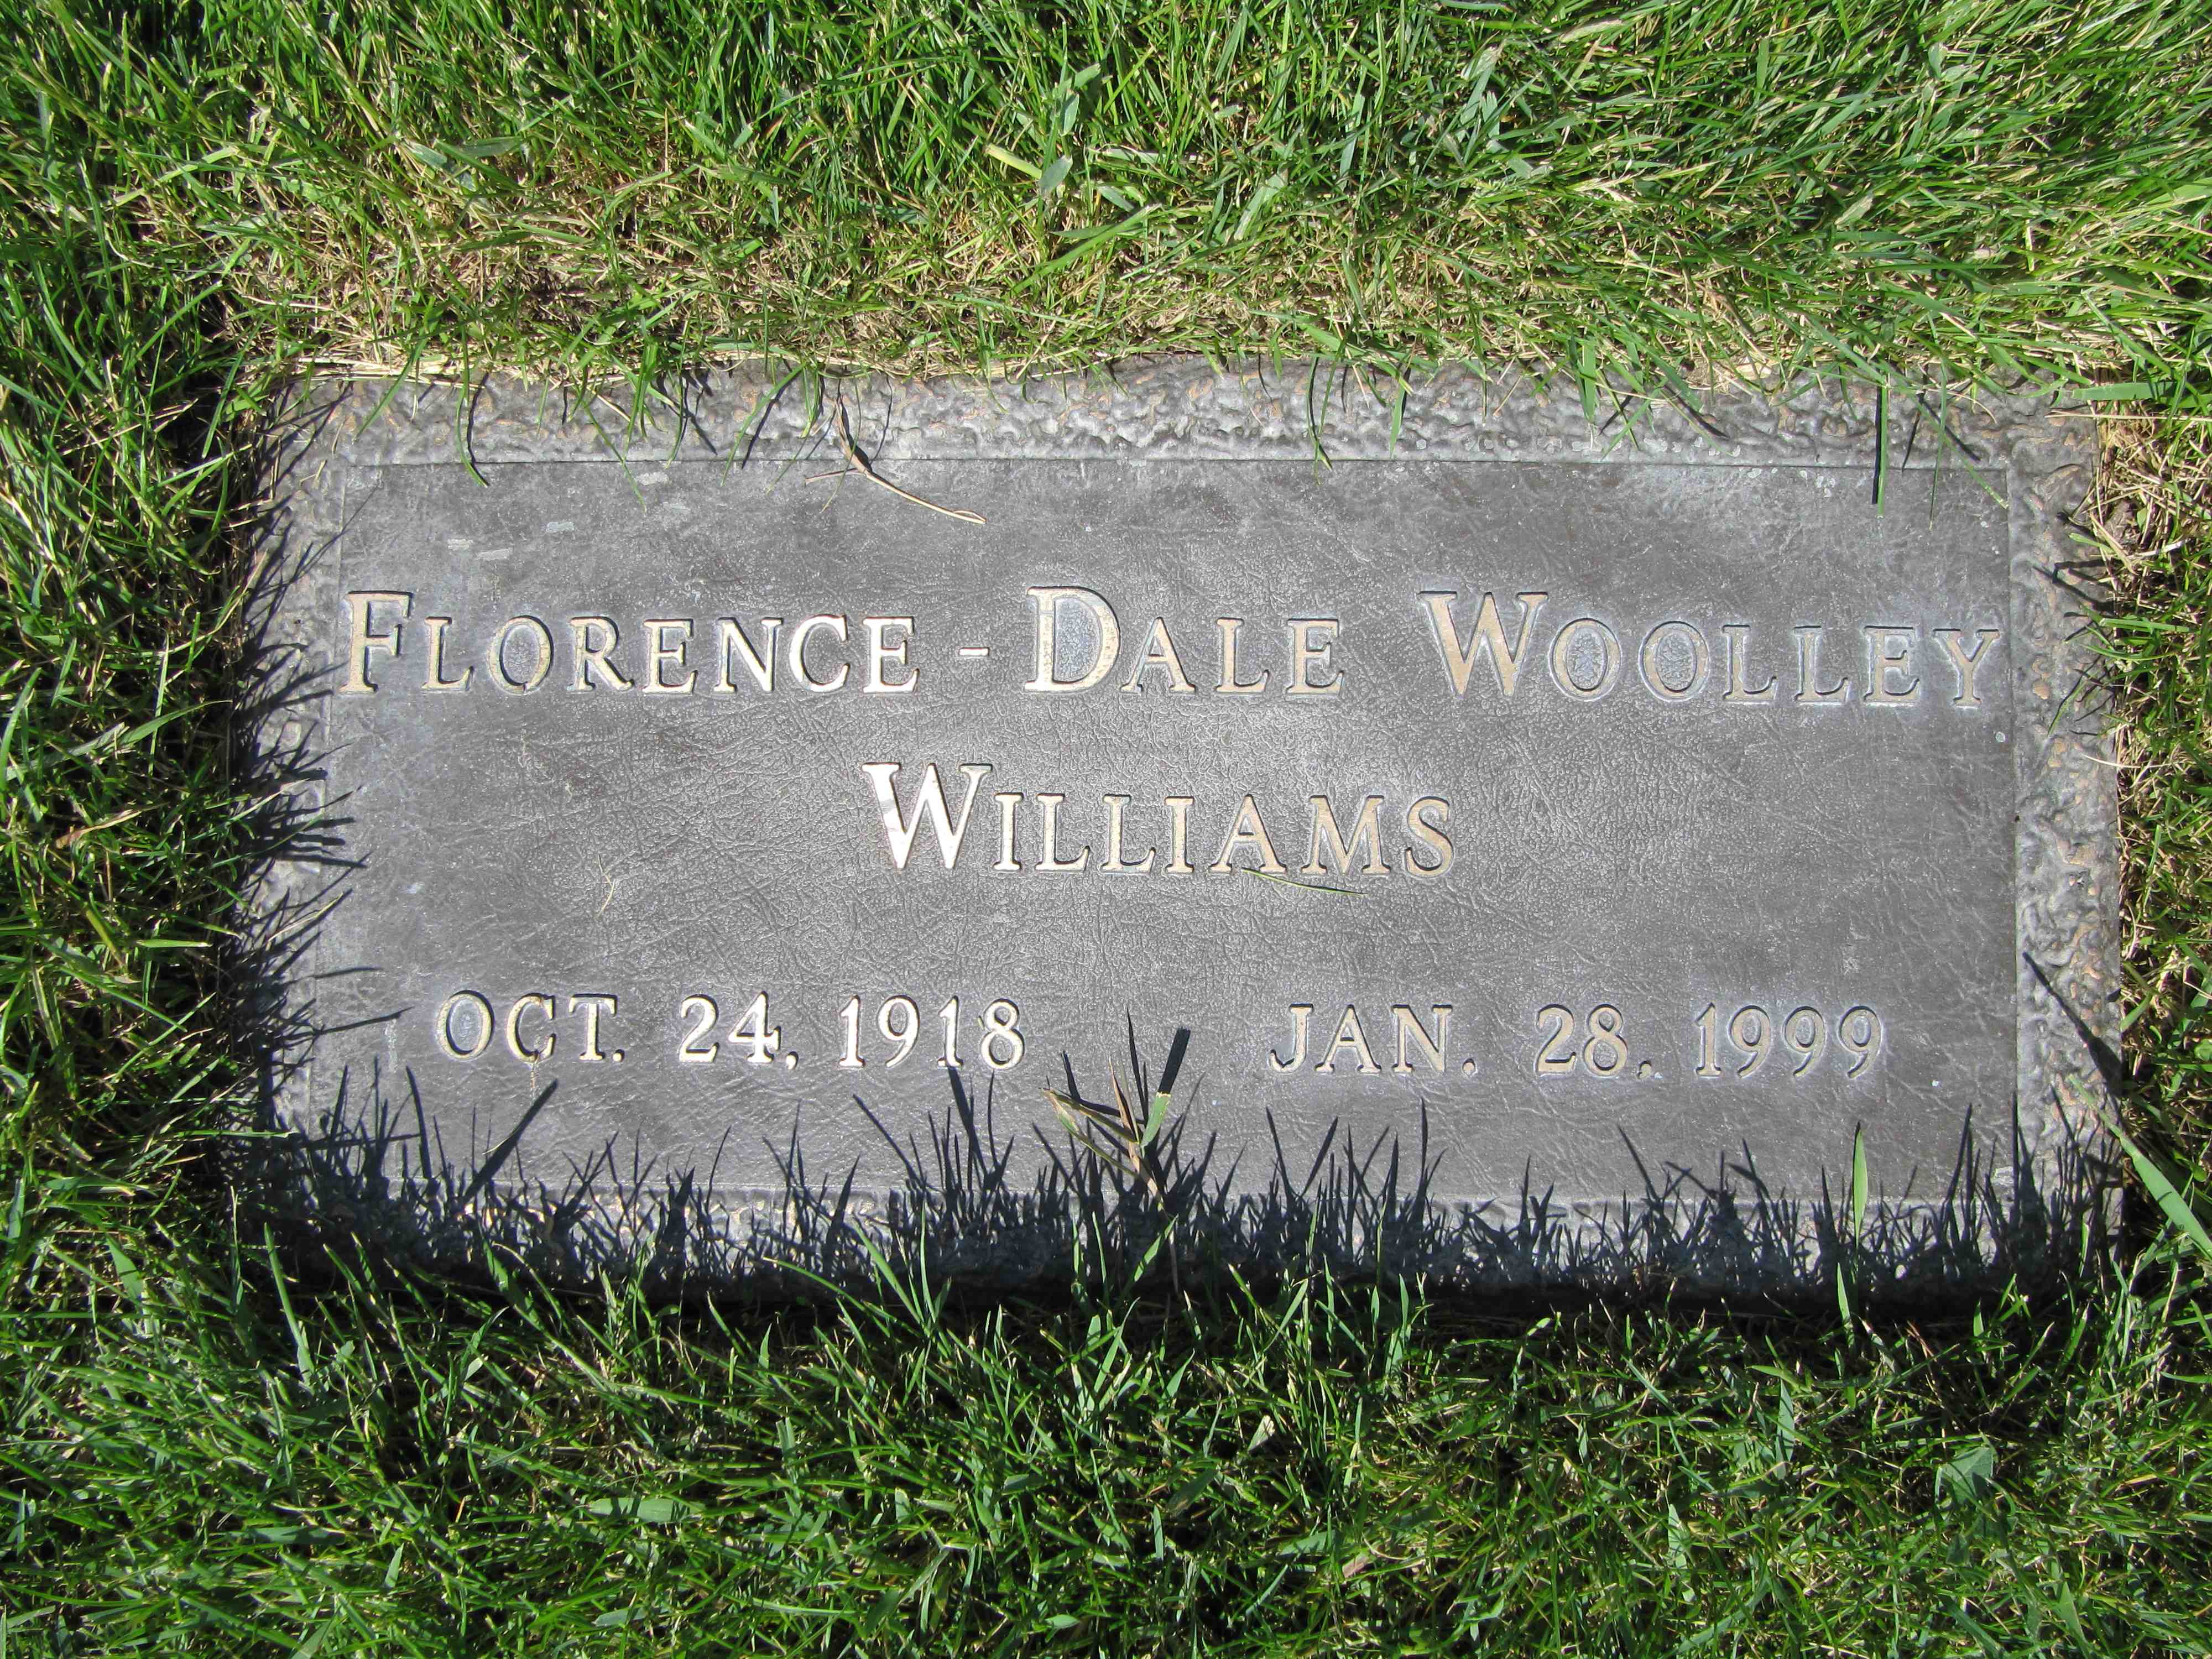 Florence-Dale Woolley Williams